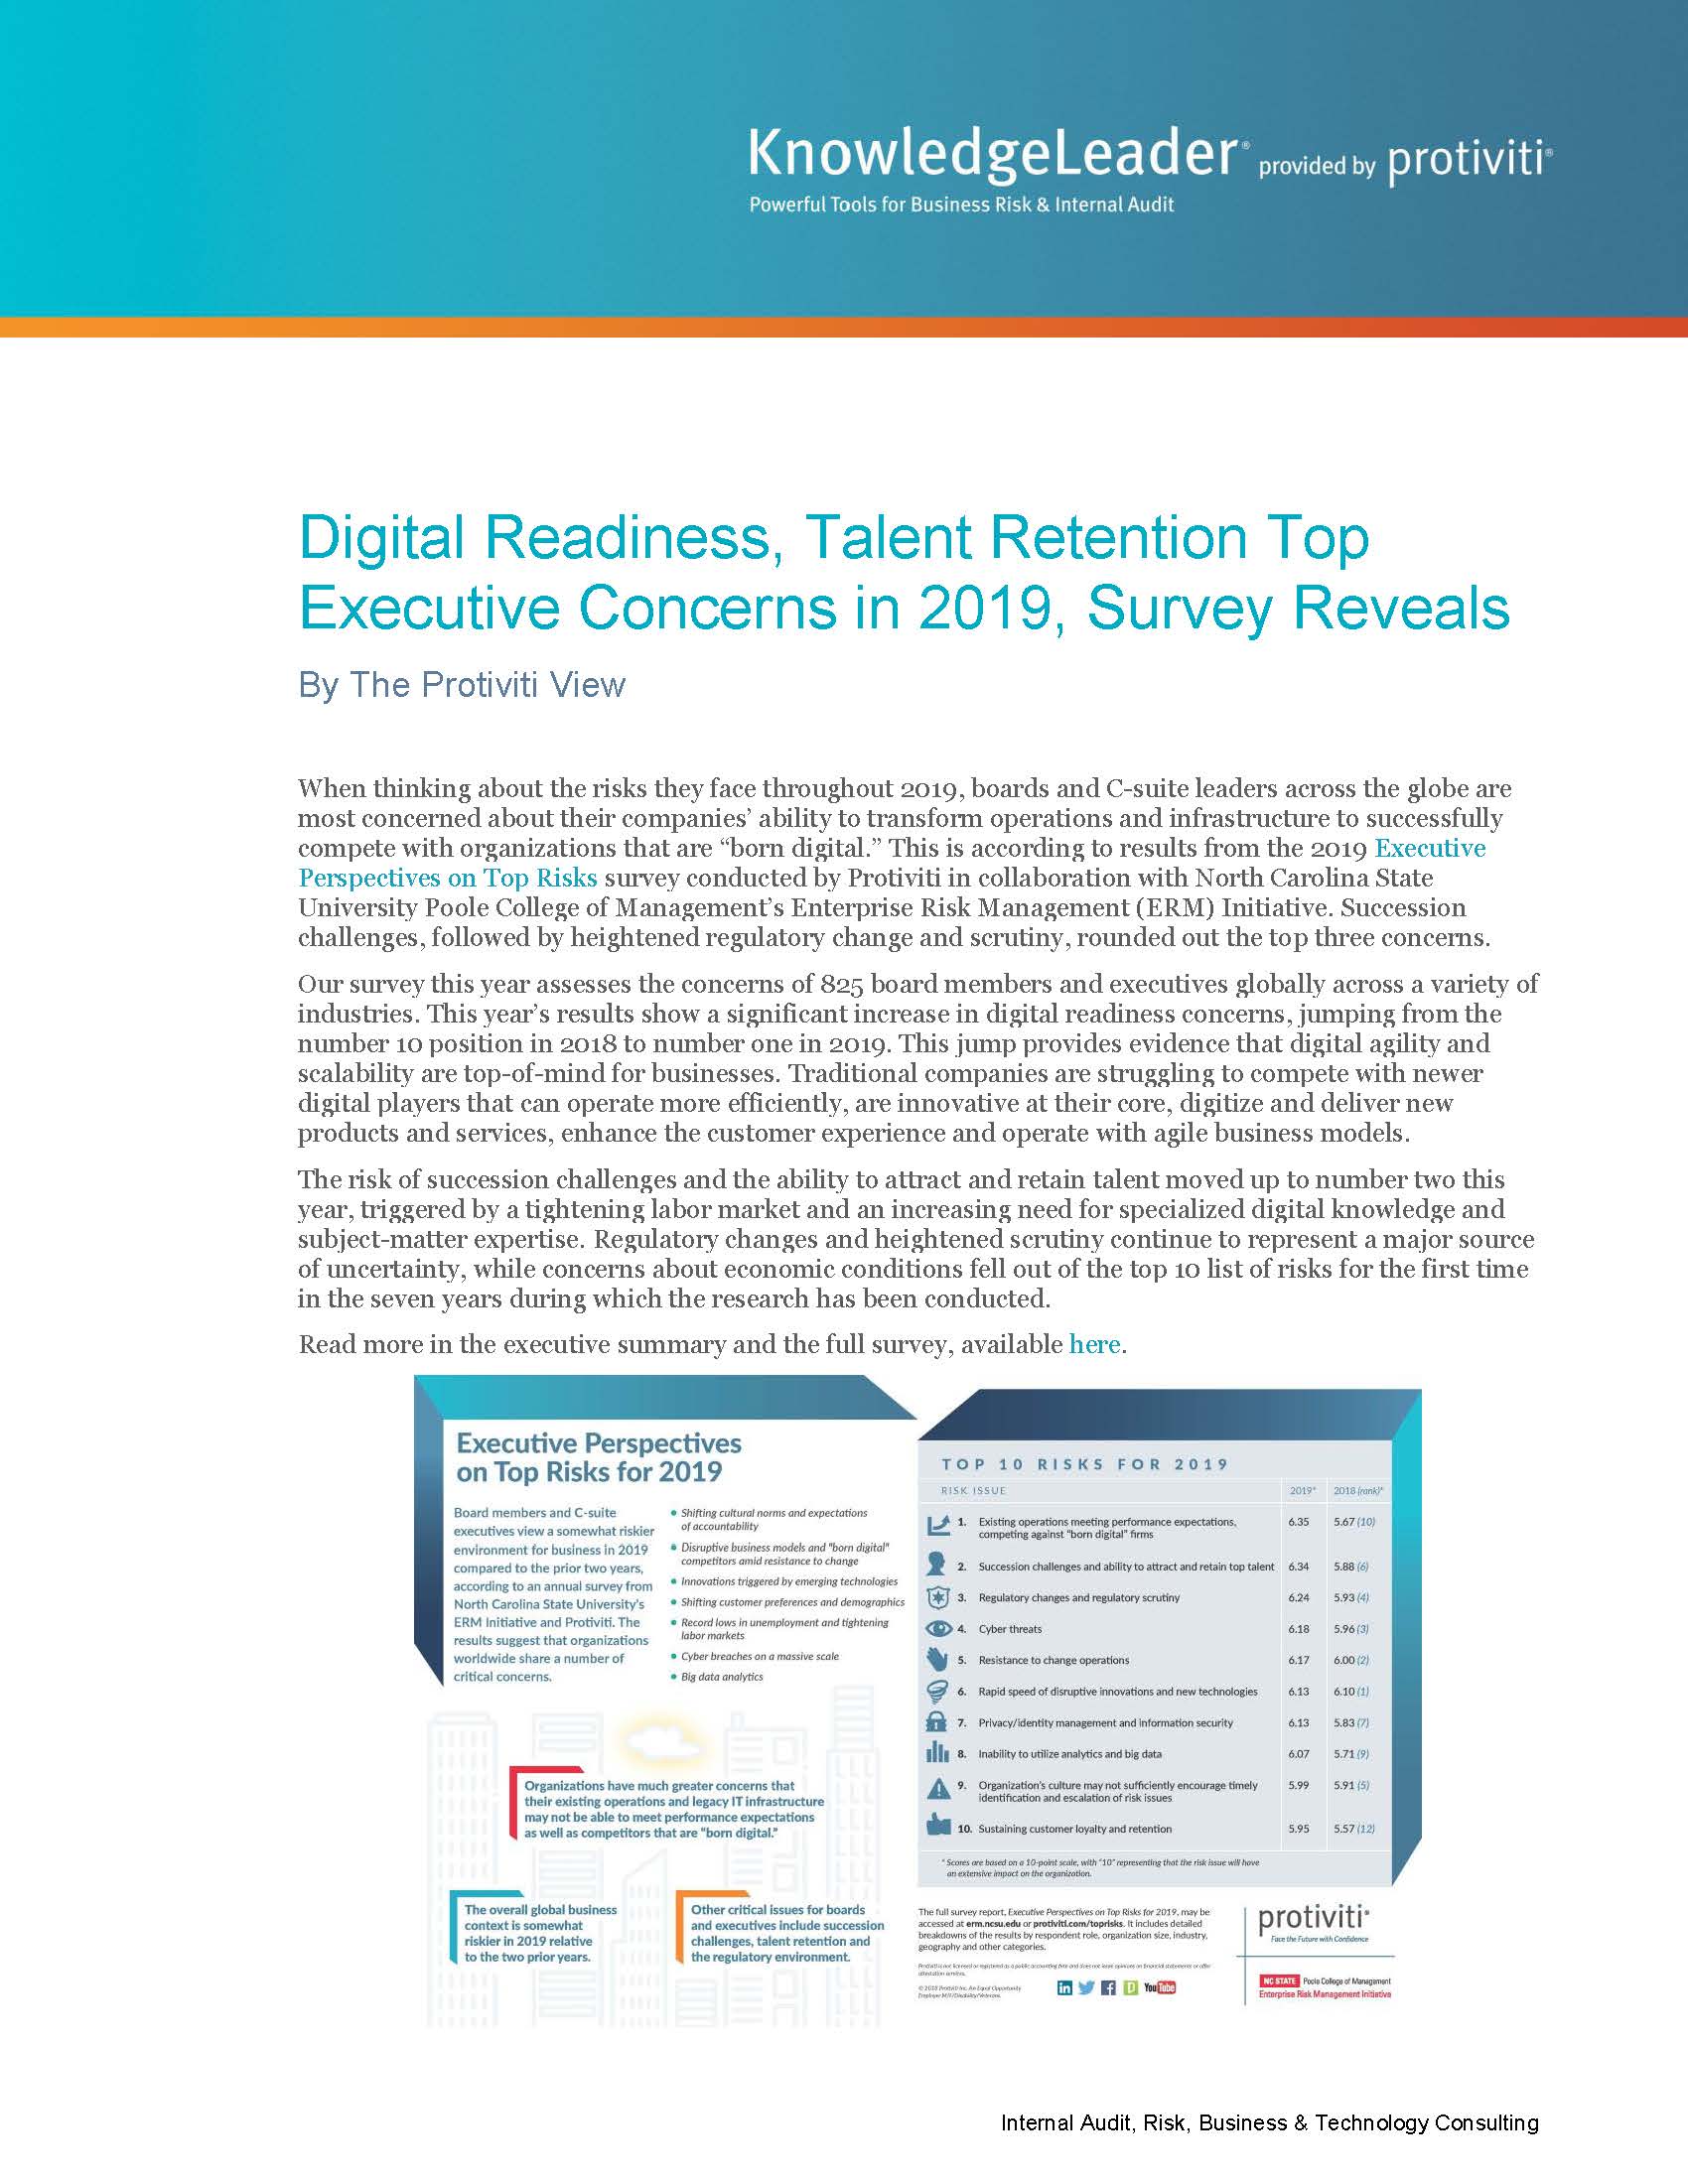 Screenshot of the first page of Digital Readiness, Talent Retention Top Executive Concerns in 2019, Survey Reveals